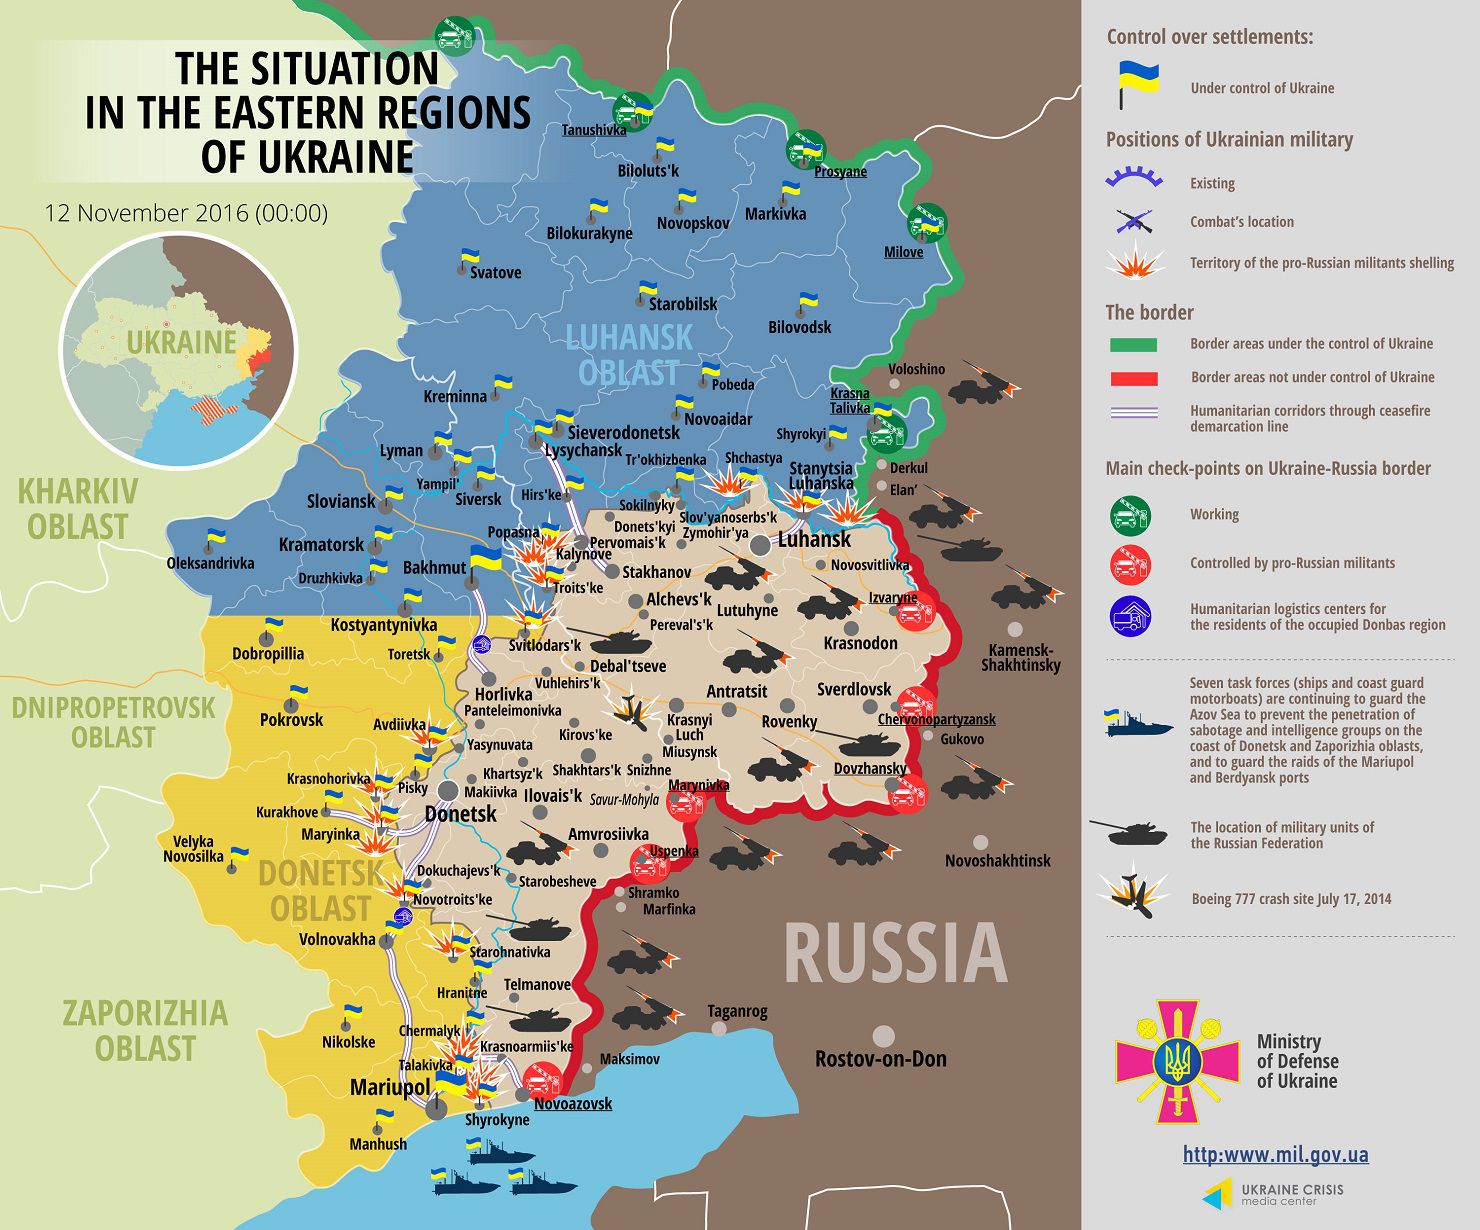 Ukraine reports 36 Russian attacks in past 24 hours: 2 soldiers killed, 2 wounded